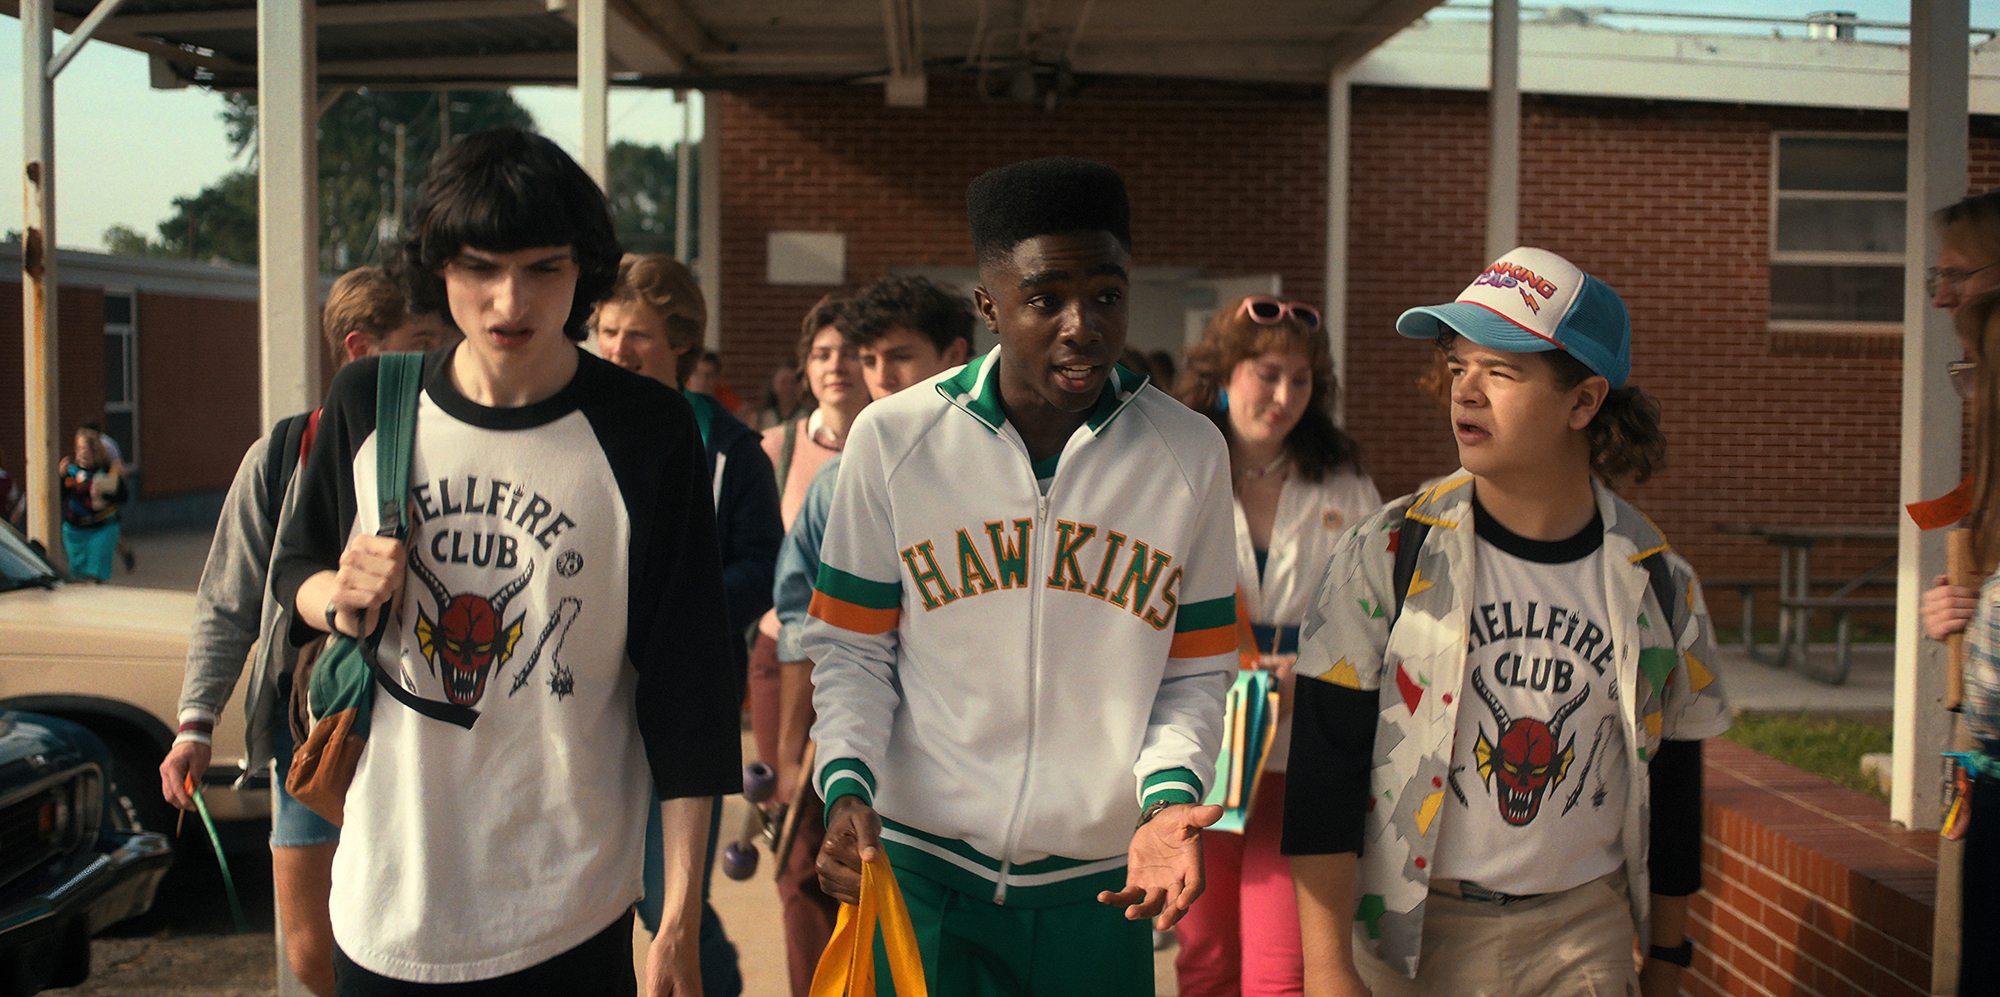 Stranger Things season 5: Everything we know about the Netflix